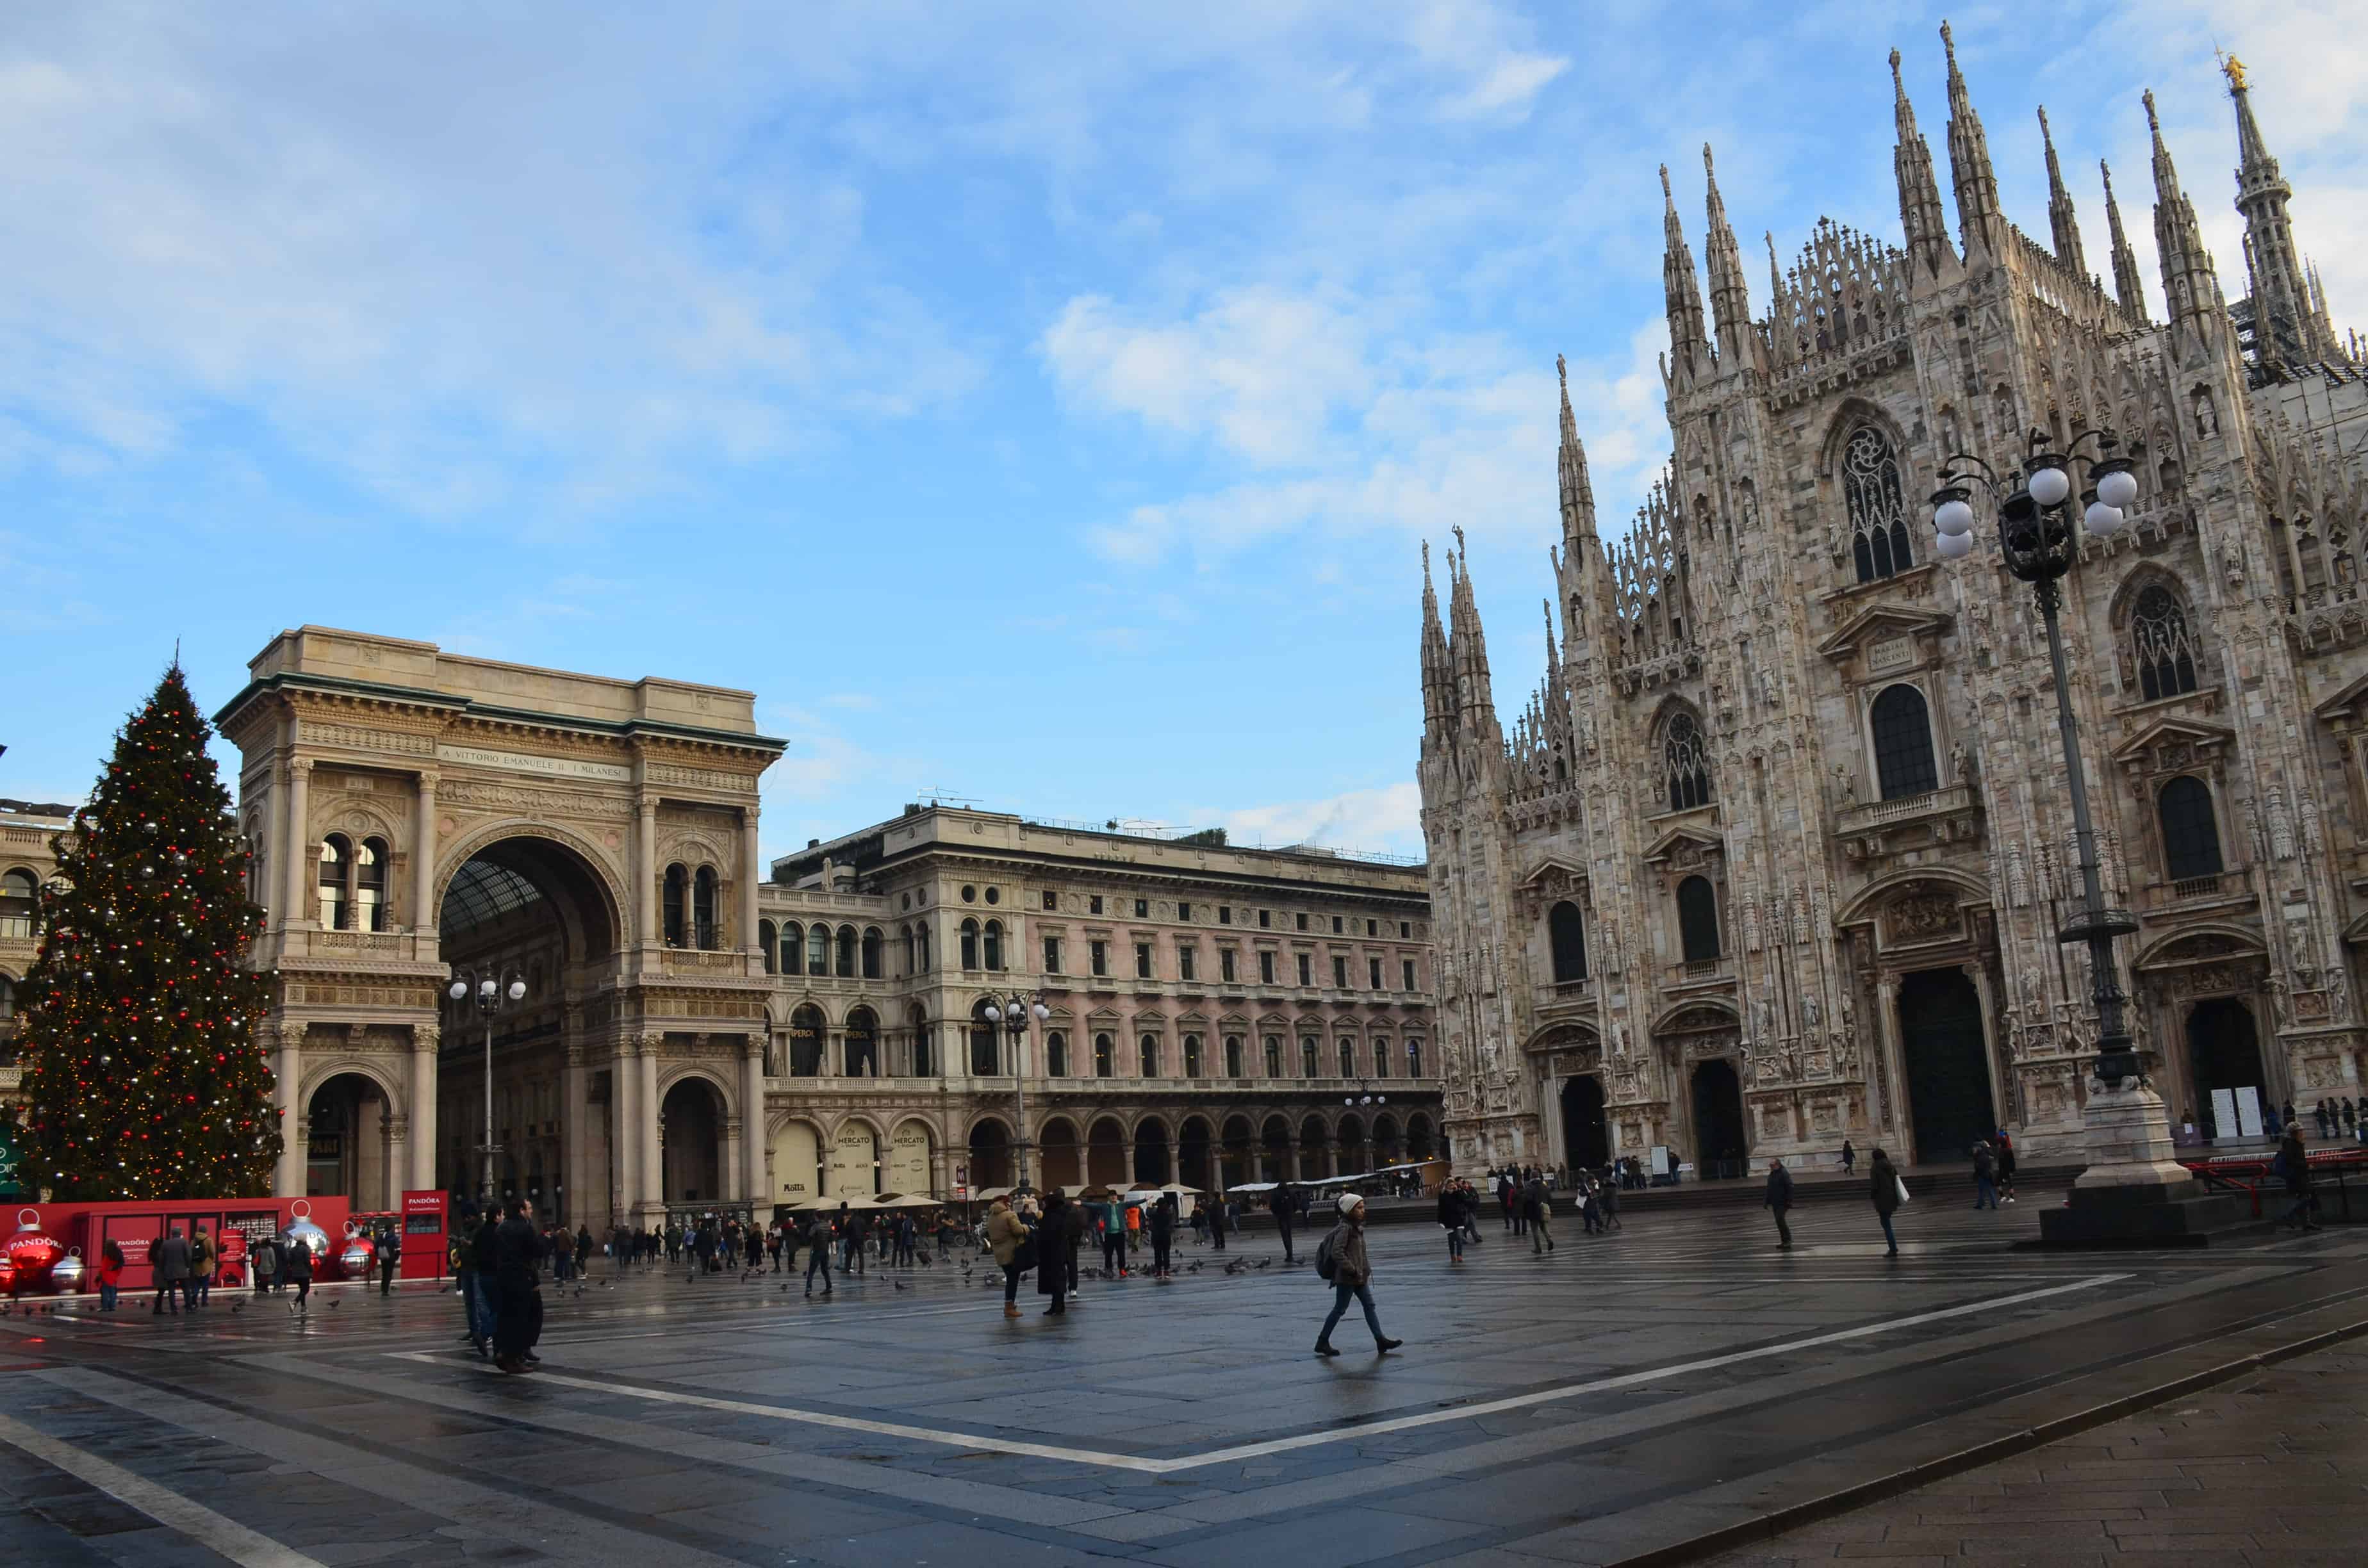 piazza-del-duomo-milan-italy-by-matteo-colombo-lupon-gov-ph